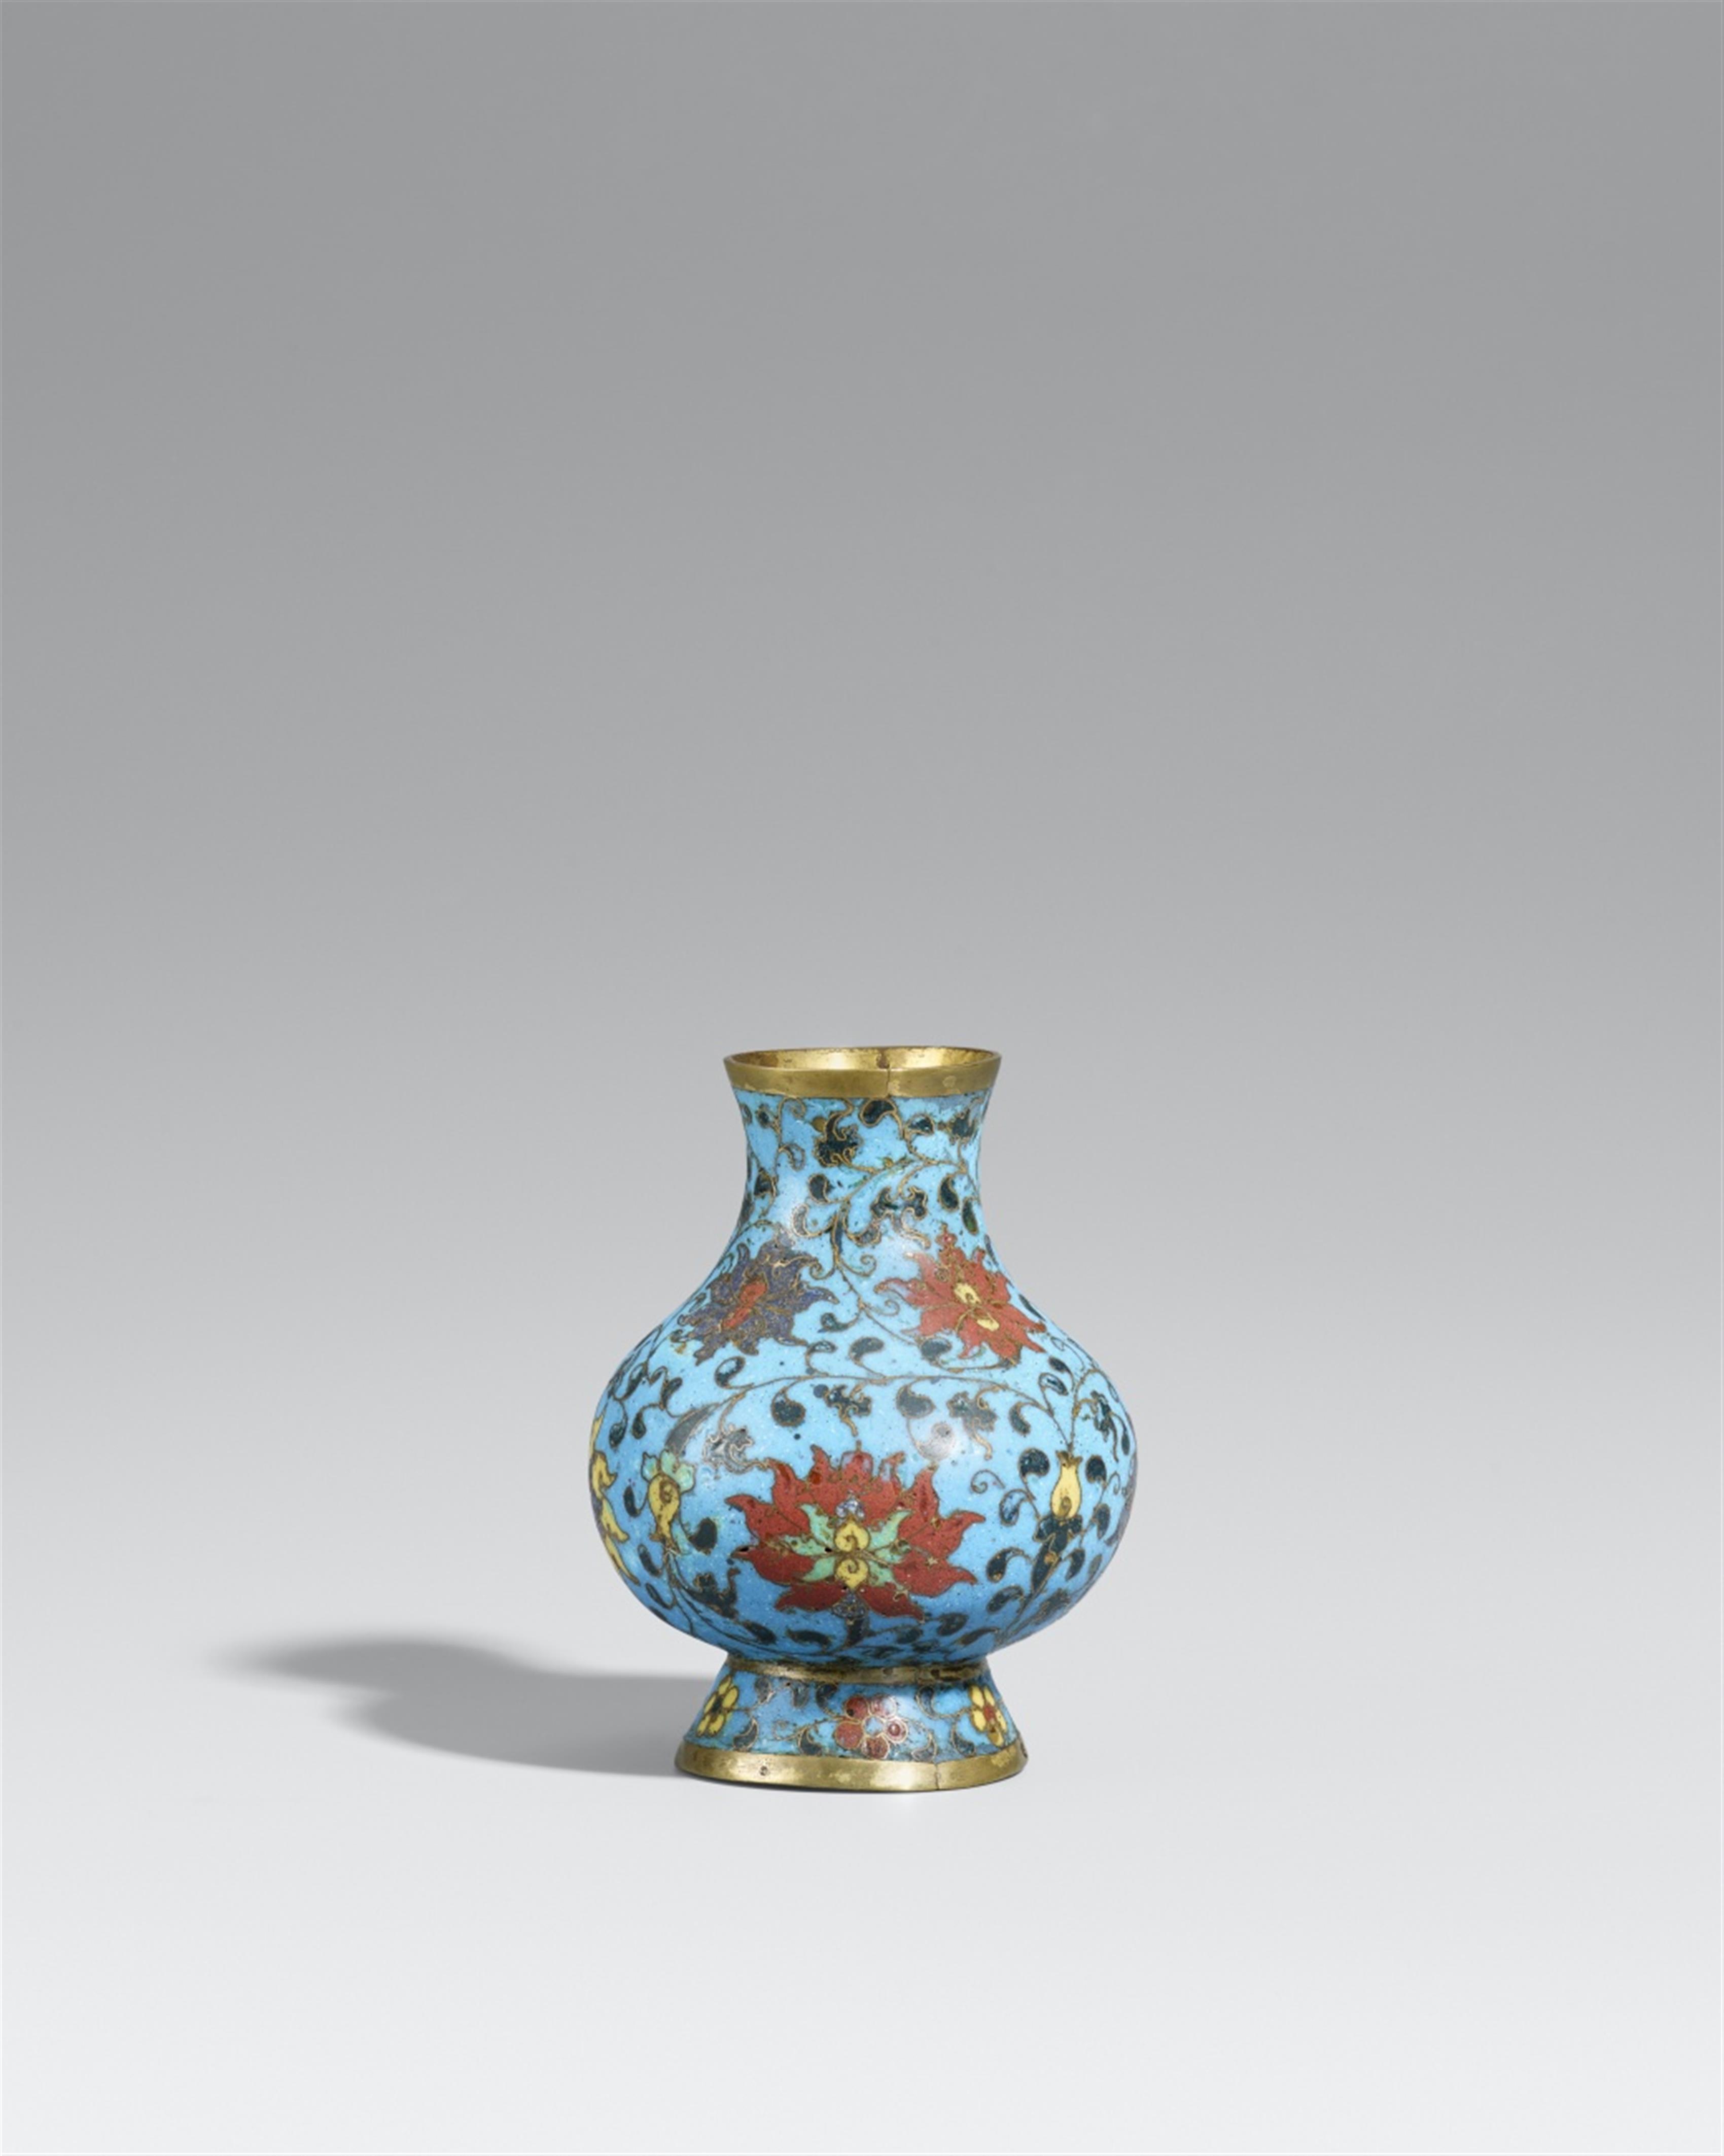 A small cloisonné enamel vase. Second half 16th/first half 17th century - image-1